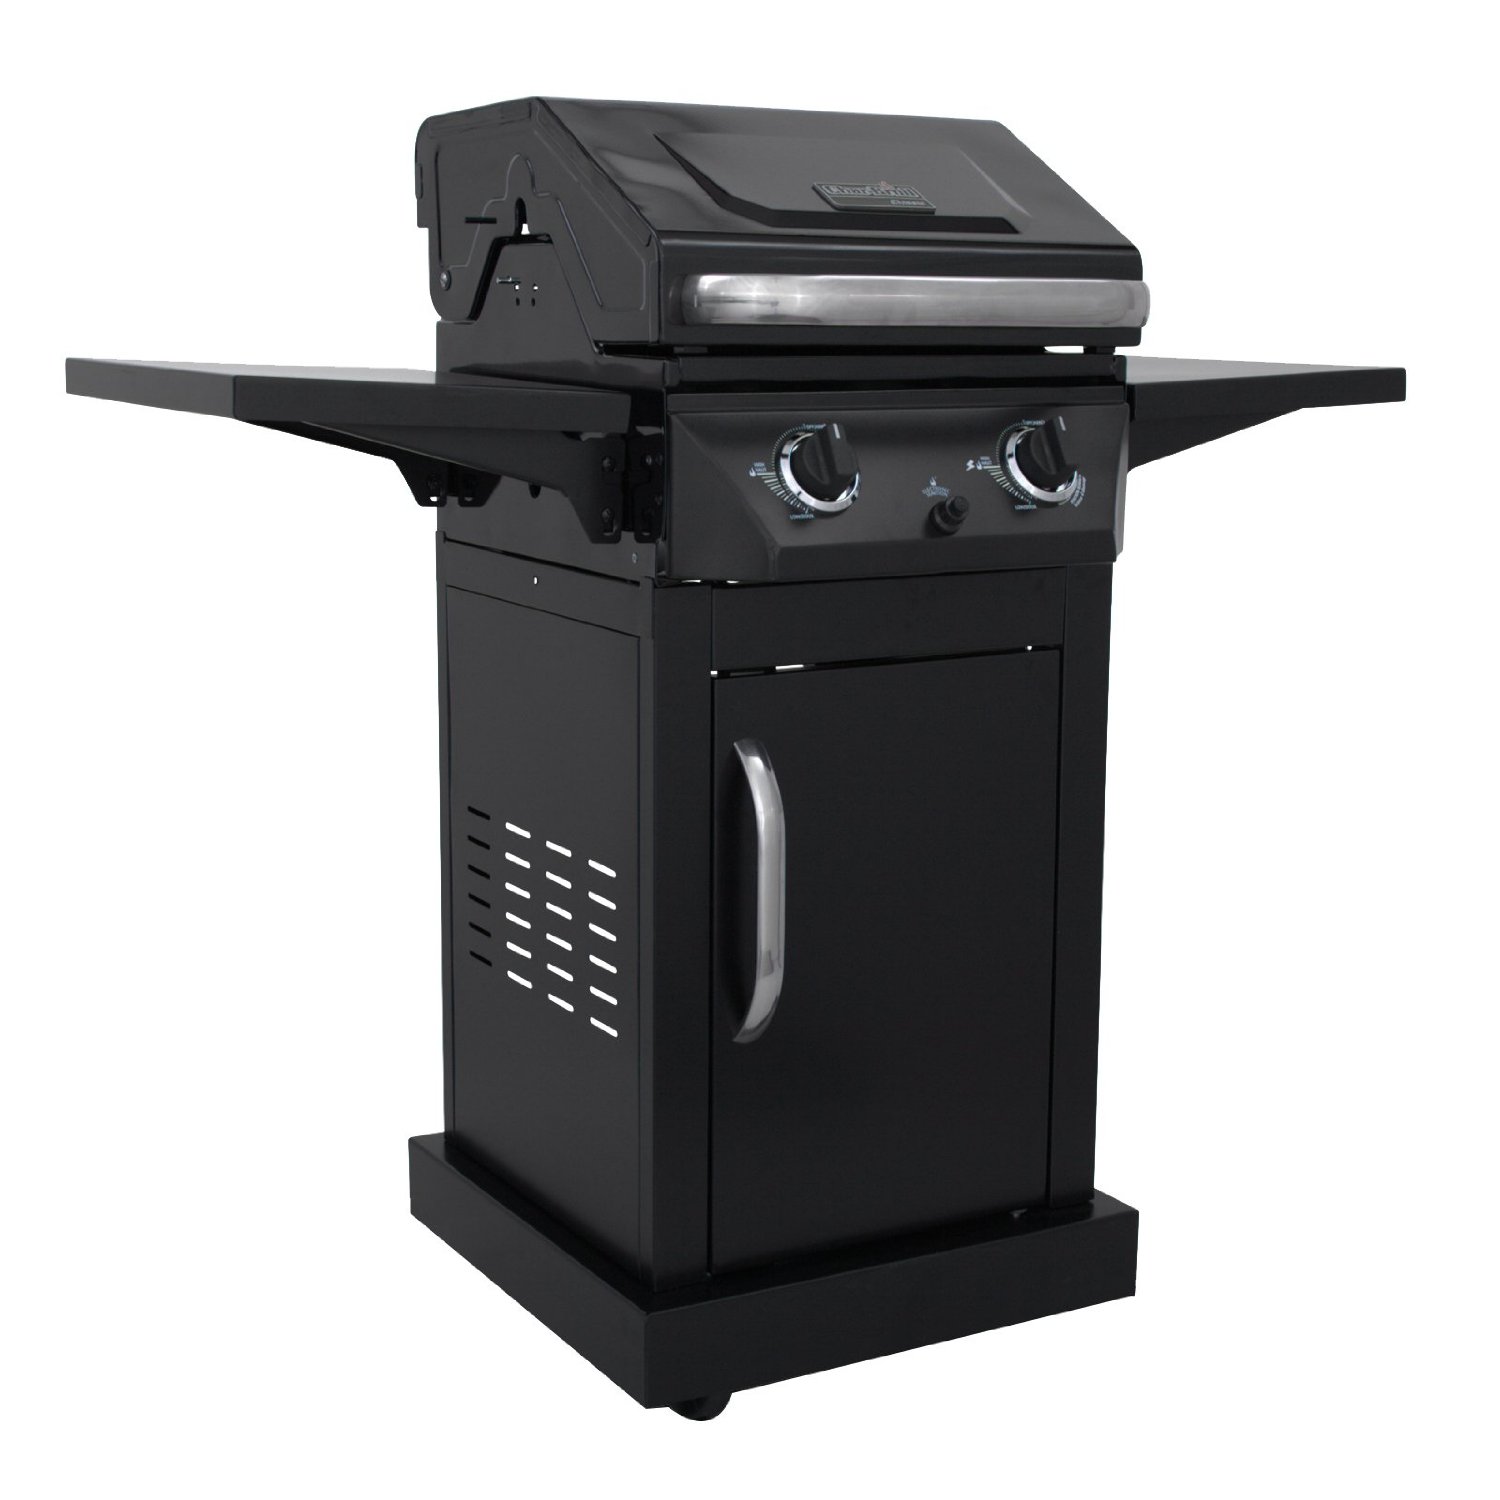 AMAZON PRIME DAY – Char-Broil Classic 300 2-Burner Gas Grill Only $111.98!